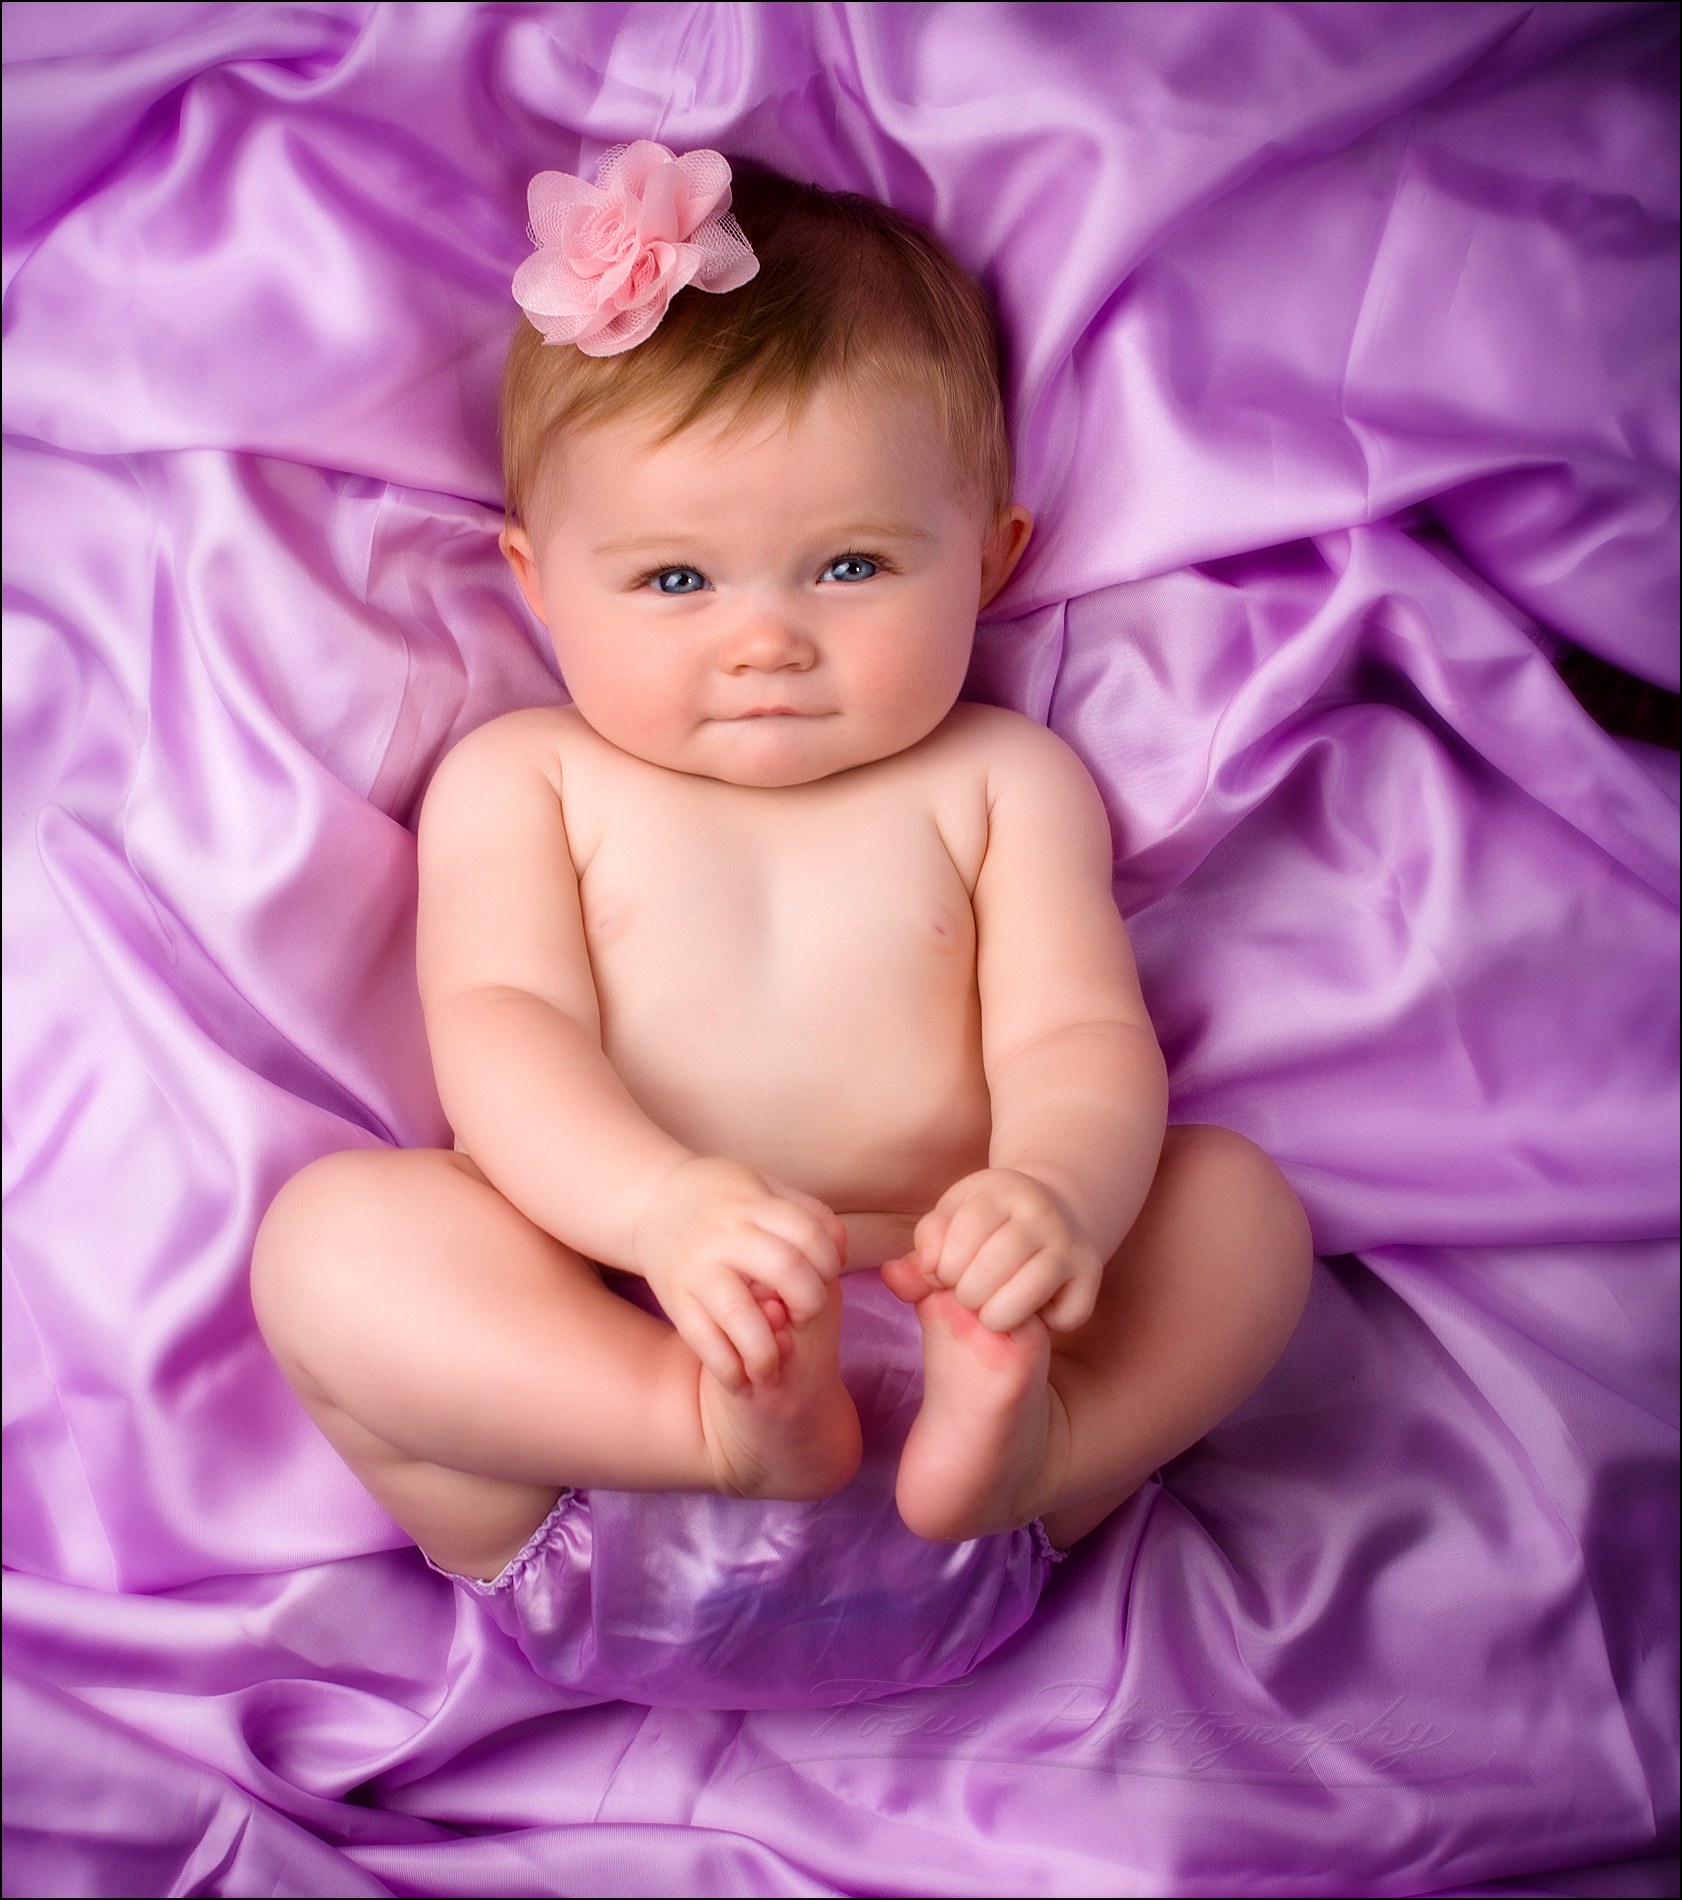 cute baby girl looking up at viewer in satin diaper cover on satin cloth